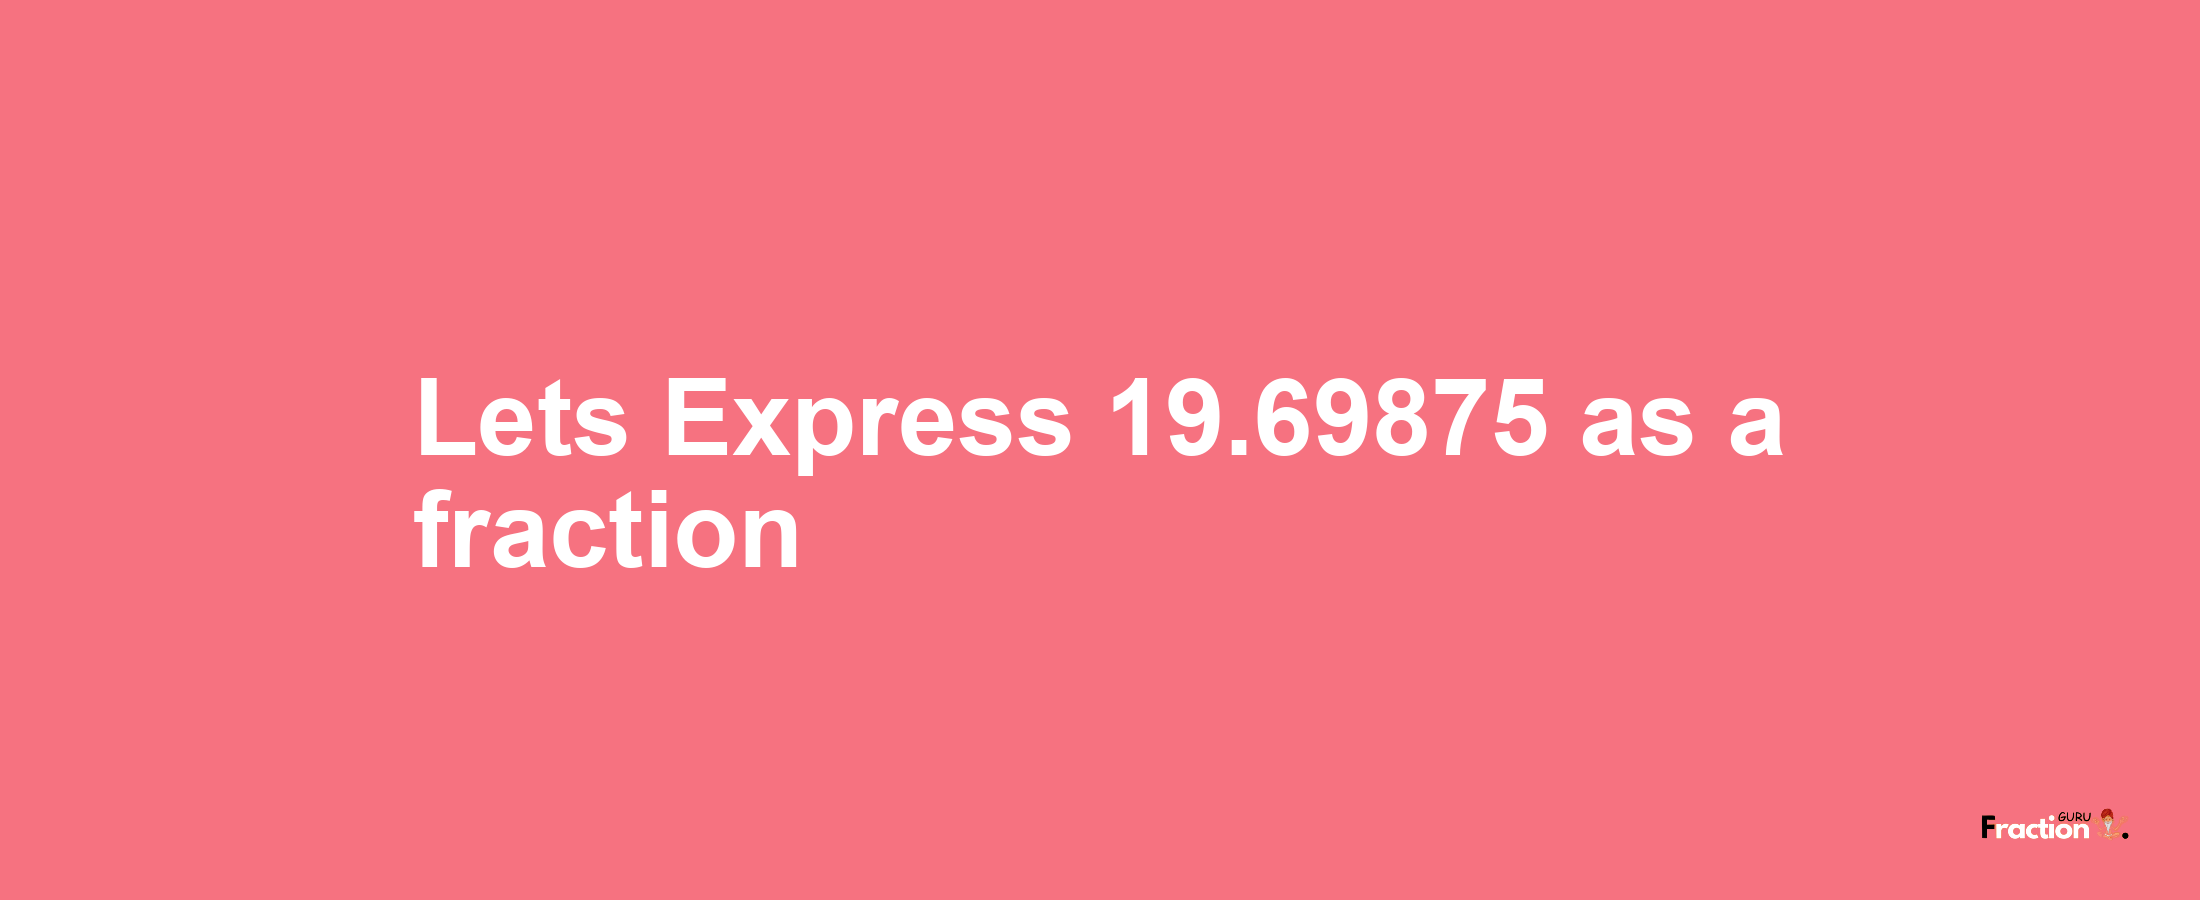 Lets Express 19.69875 as afraction